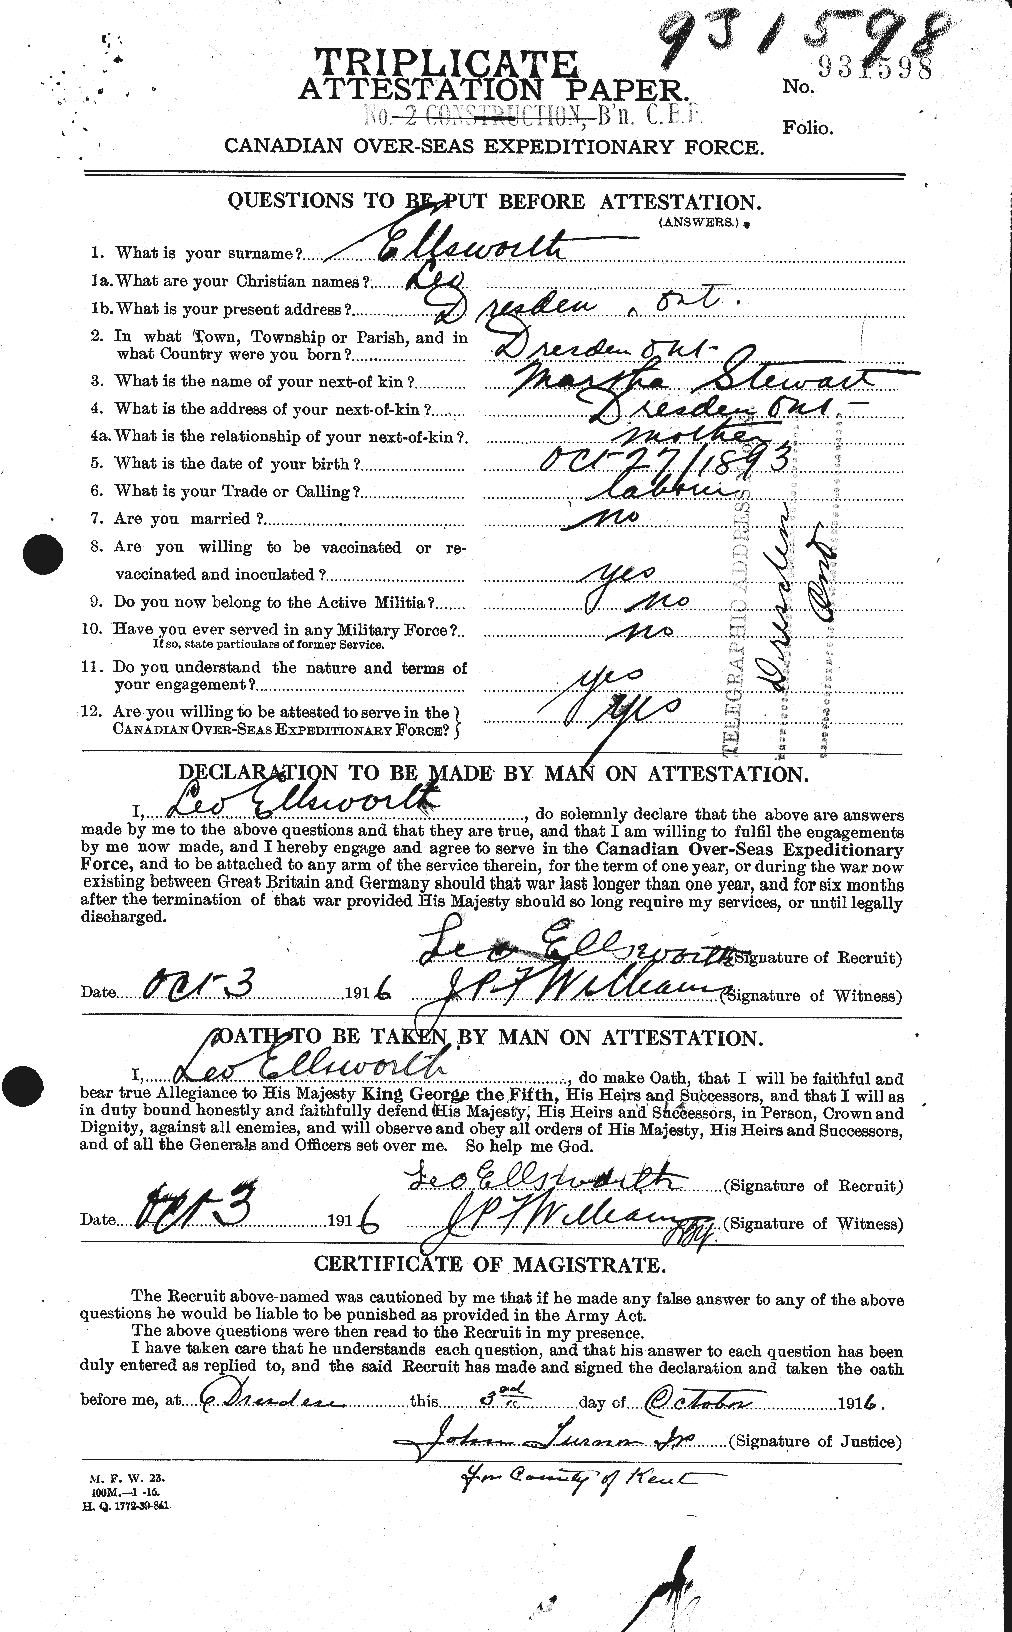 Personnel Records of the First World War - CEF 311423a